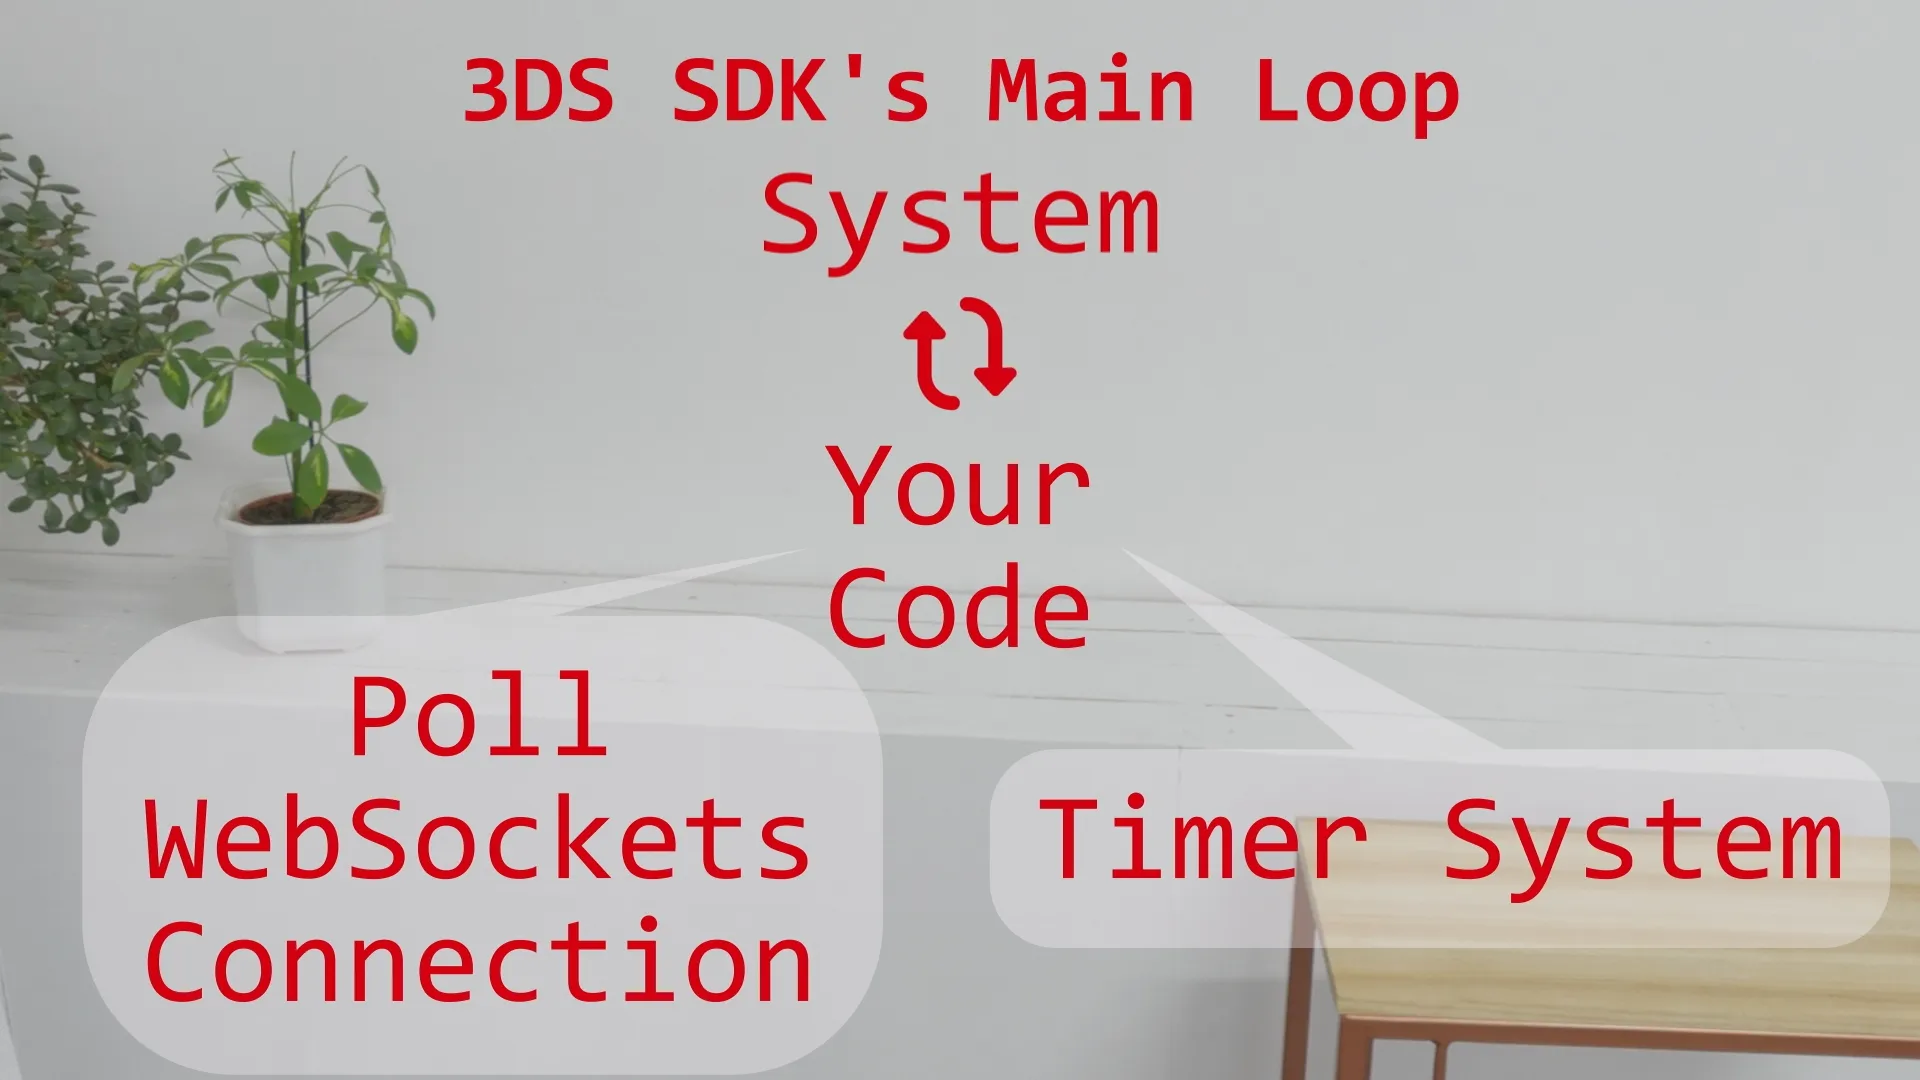 while 3DS SDK's main loop runs, our code runs. Our code contains polling the WebSockets connection and the timer system